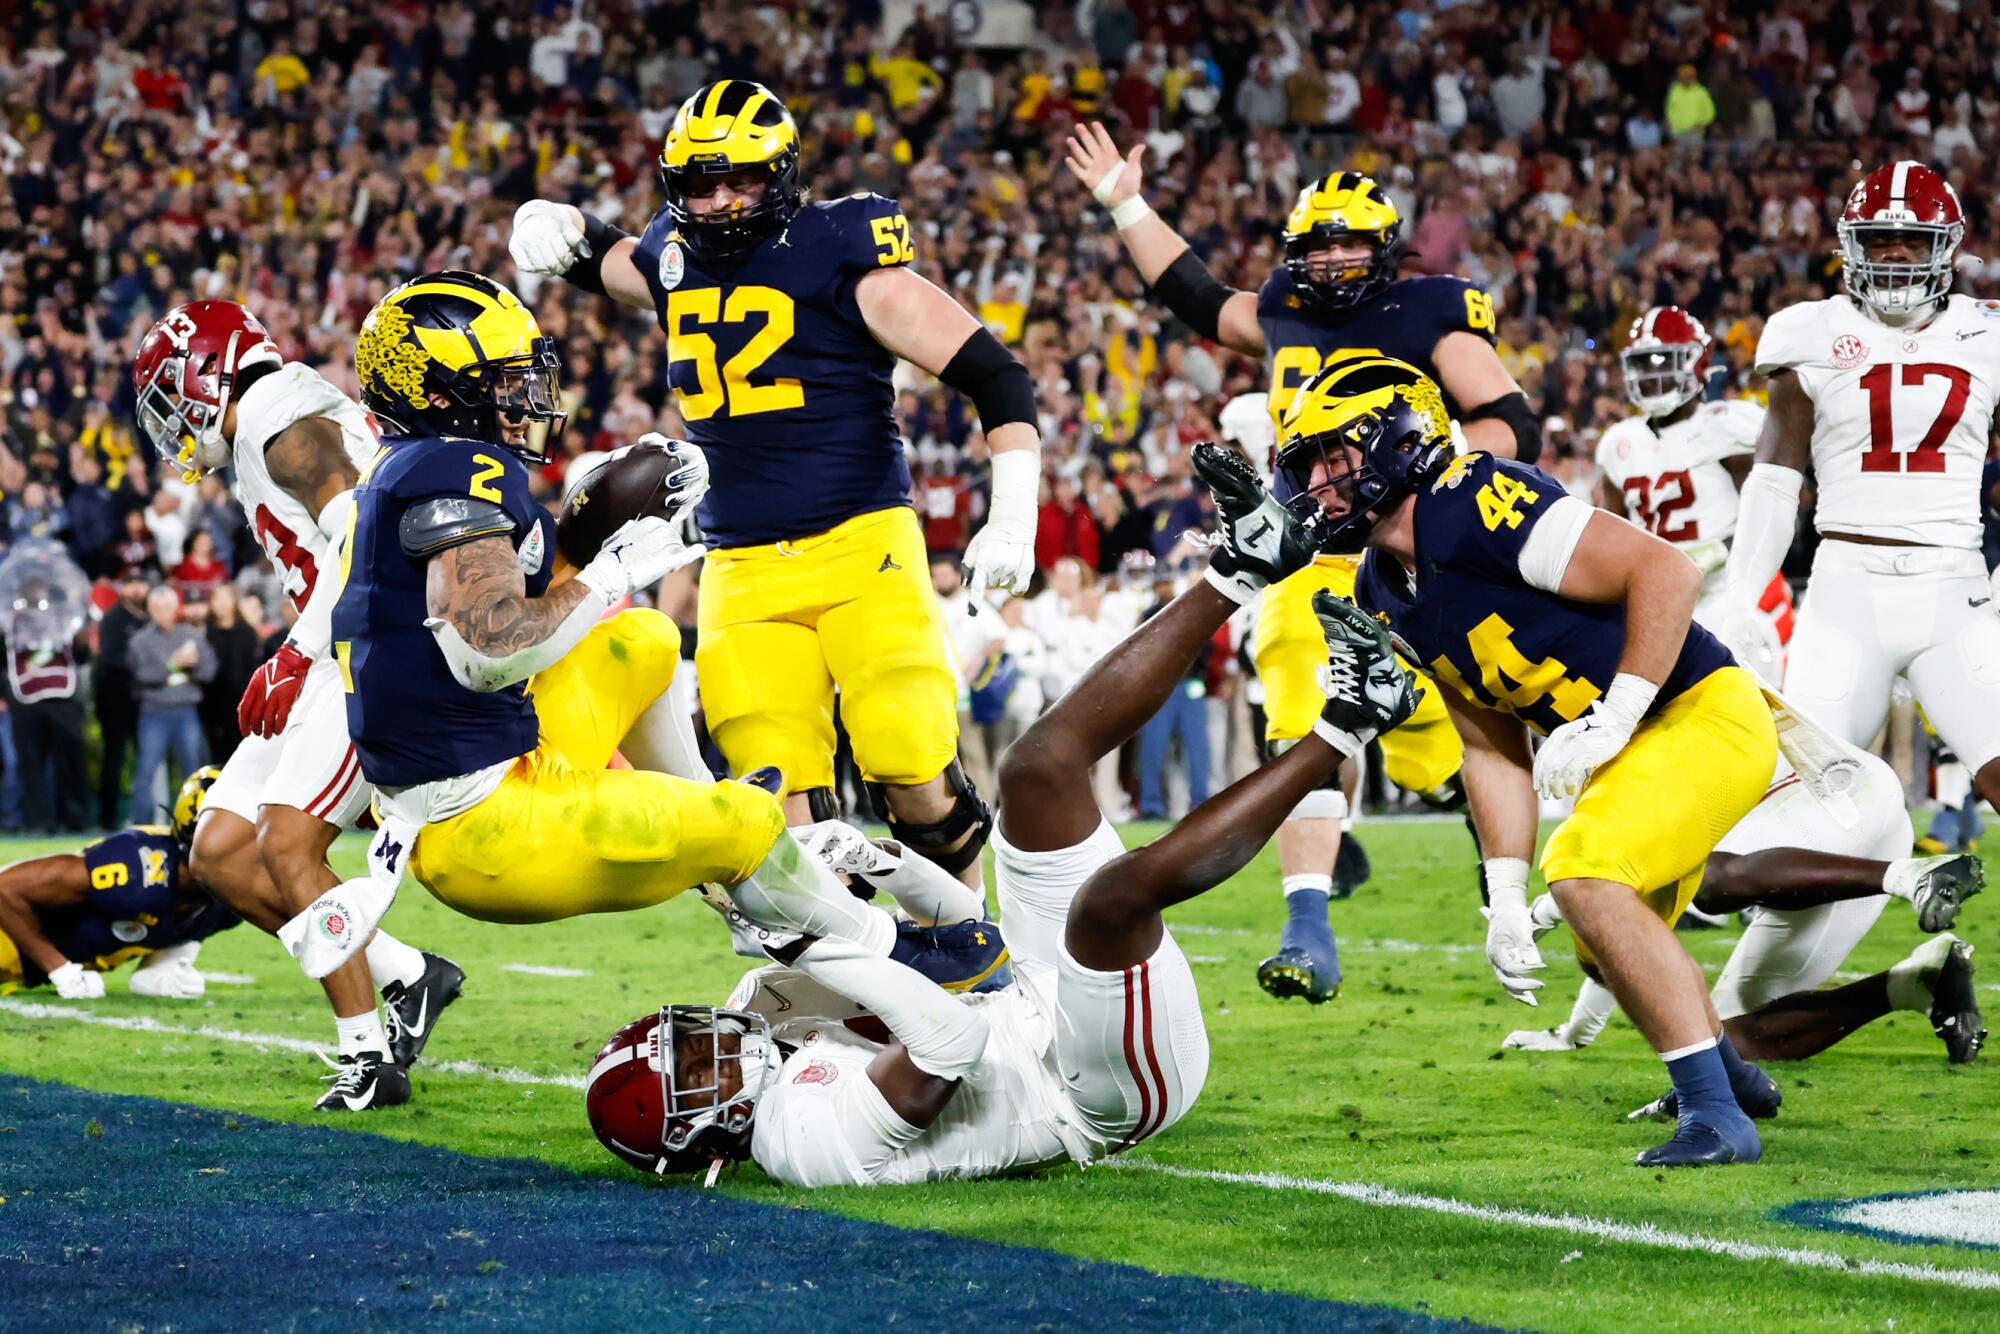 Michigan running back Blake Corum scores the go-ahead touchdown in overtime off a 17-yard run at the Rose Bowl.